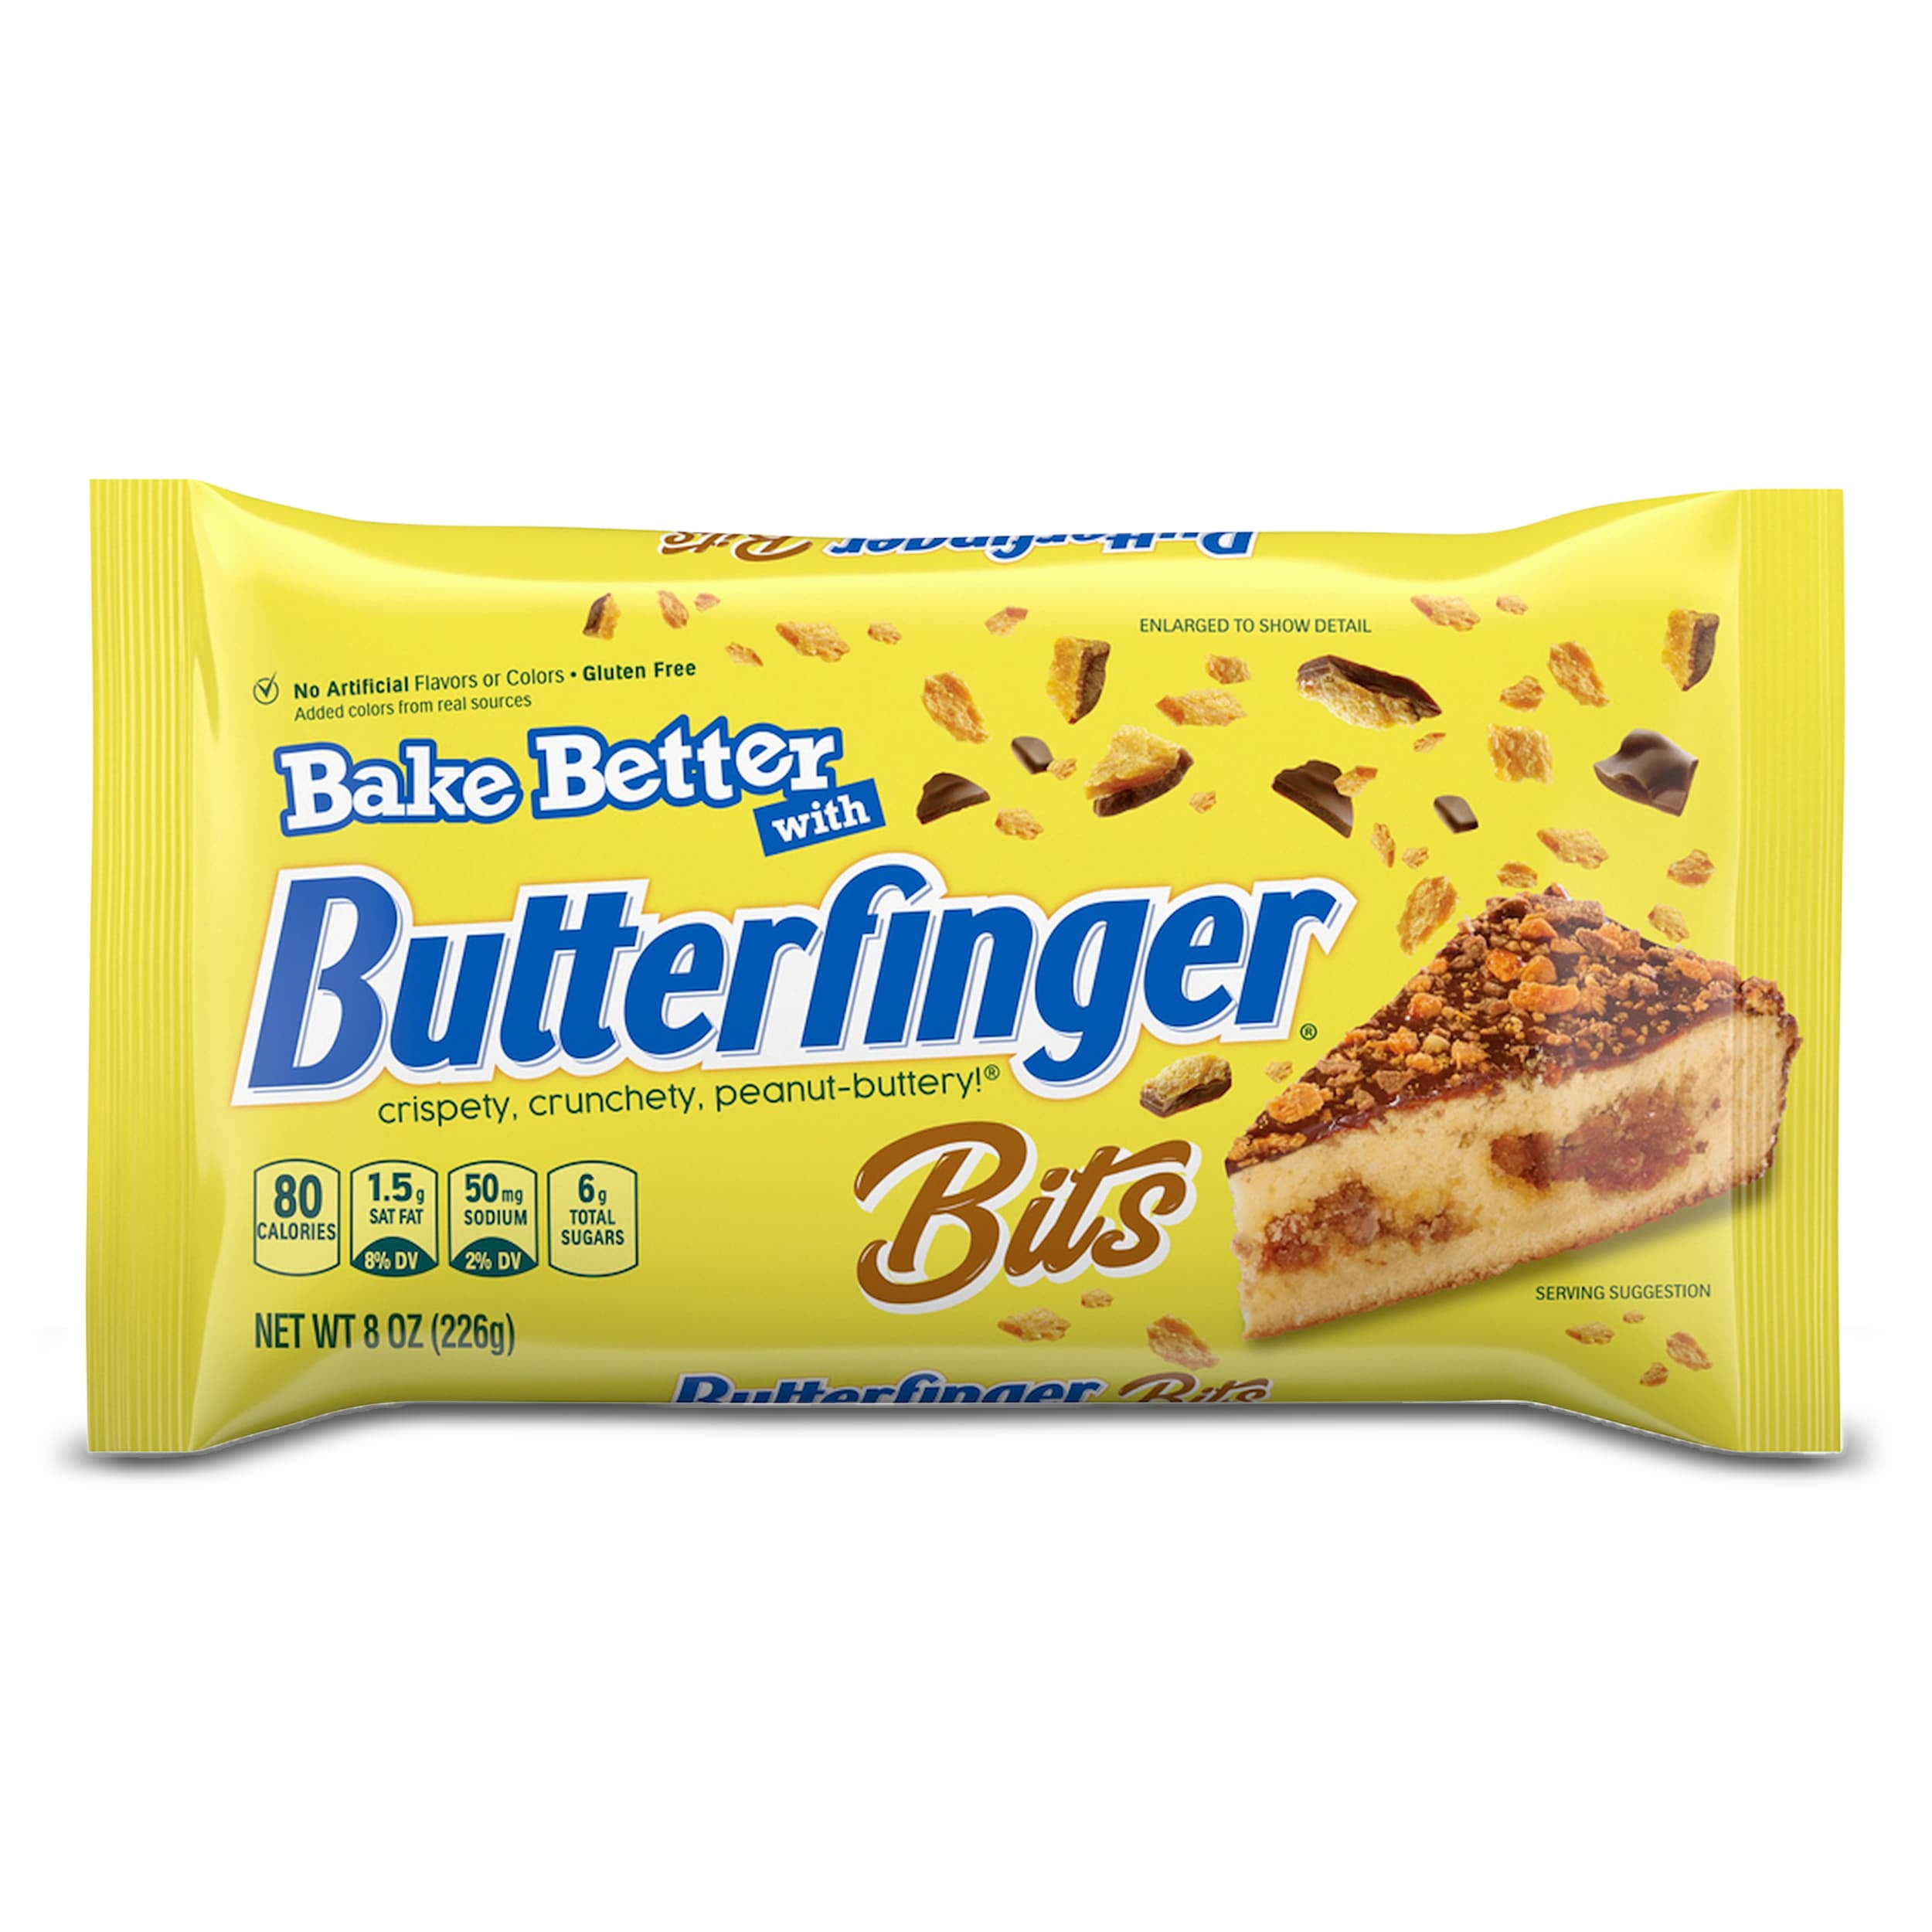 Butterfinger, Chocolatey, Peanut-Buttery, Baking Bits for Recipes, Perfect for Easter Baking, 8 oz